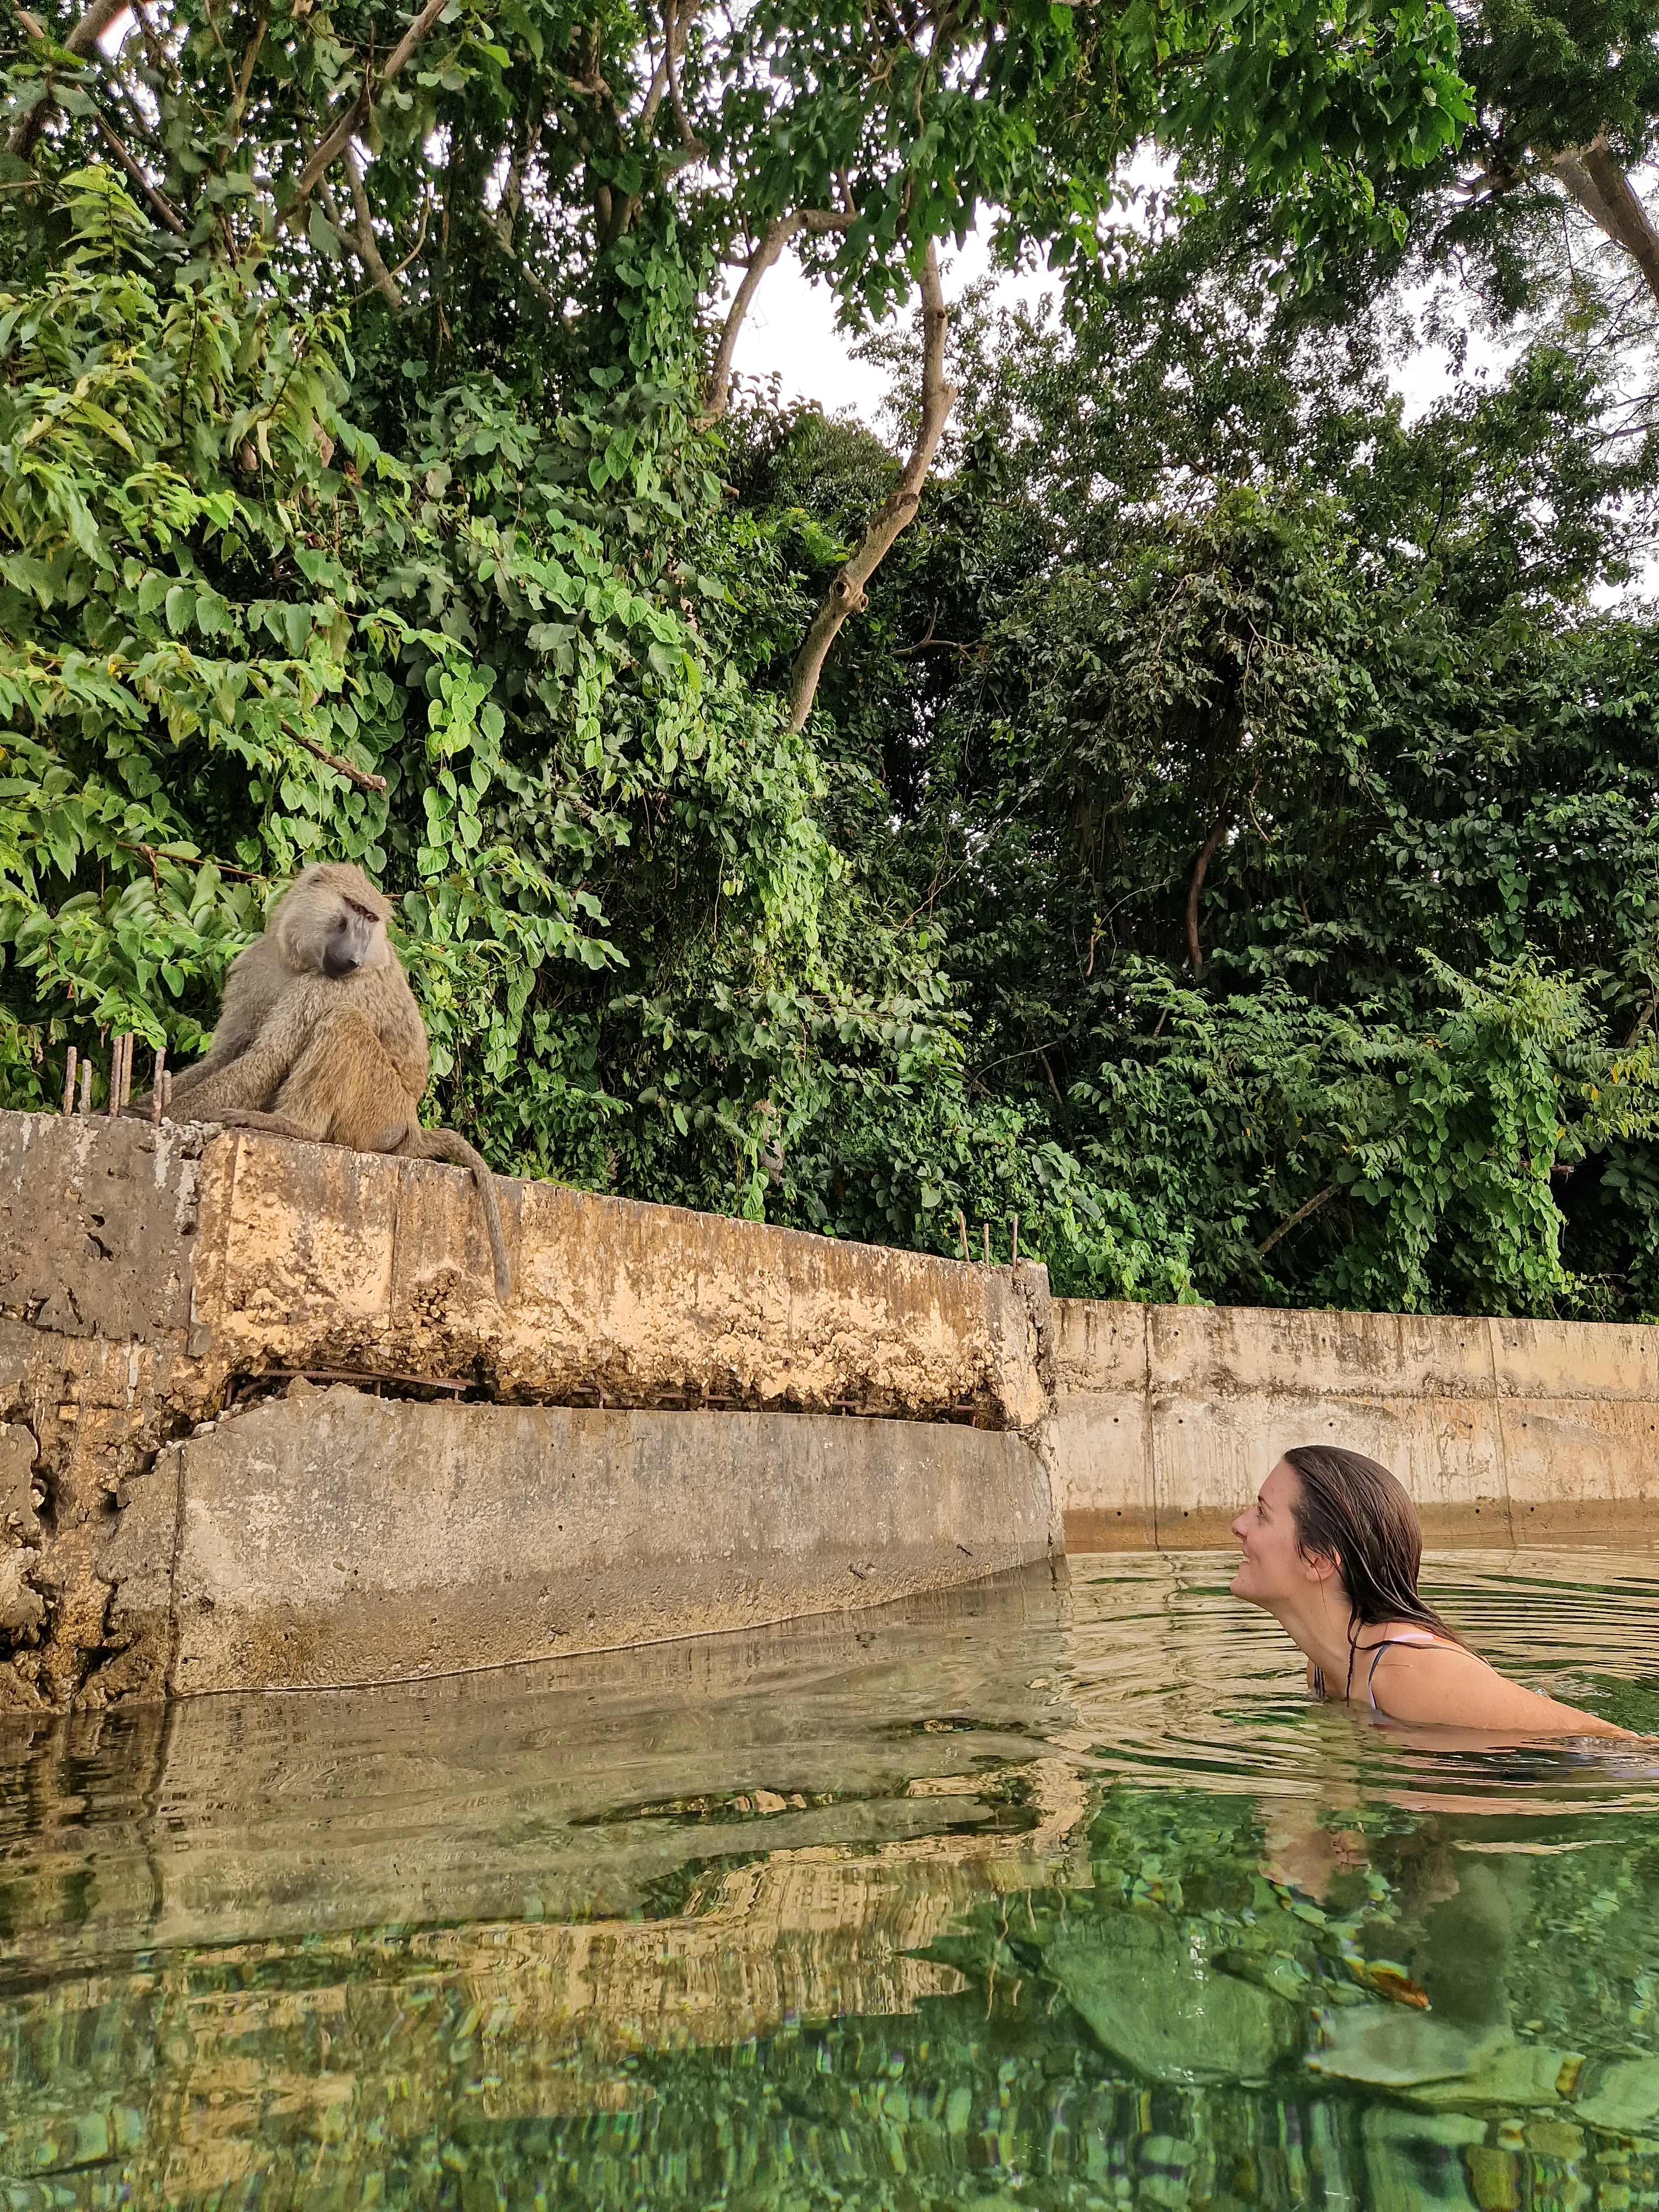 Swimming in the lake, watched by baboons